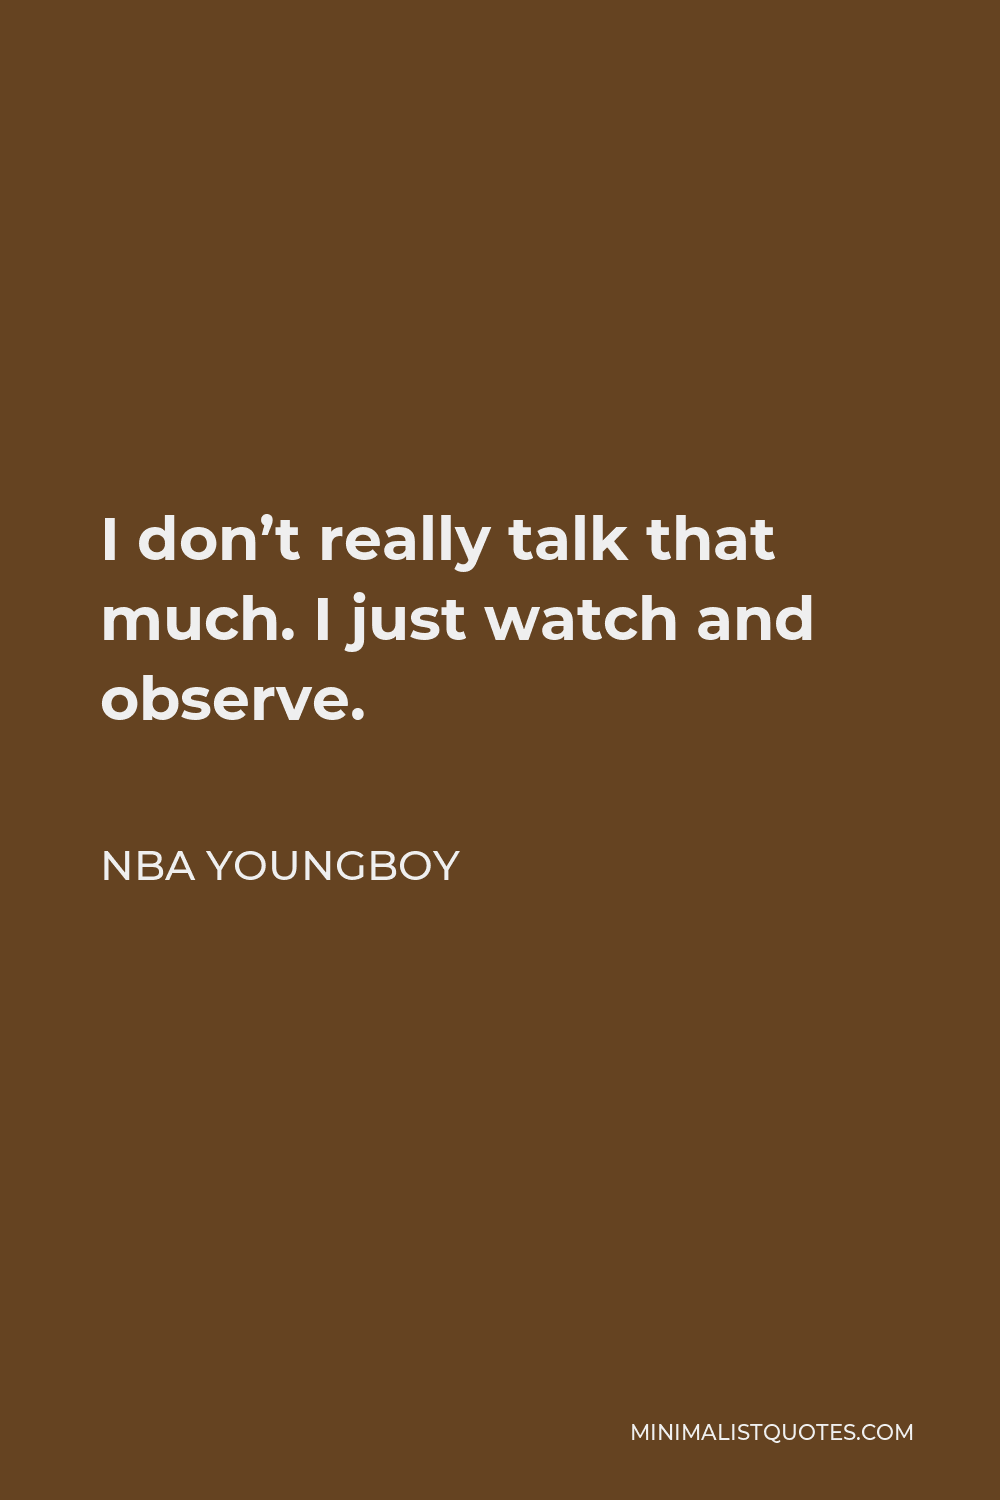 NBA Youngboy Quote: I don't really talk that much. I just watch and observe.